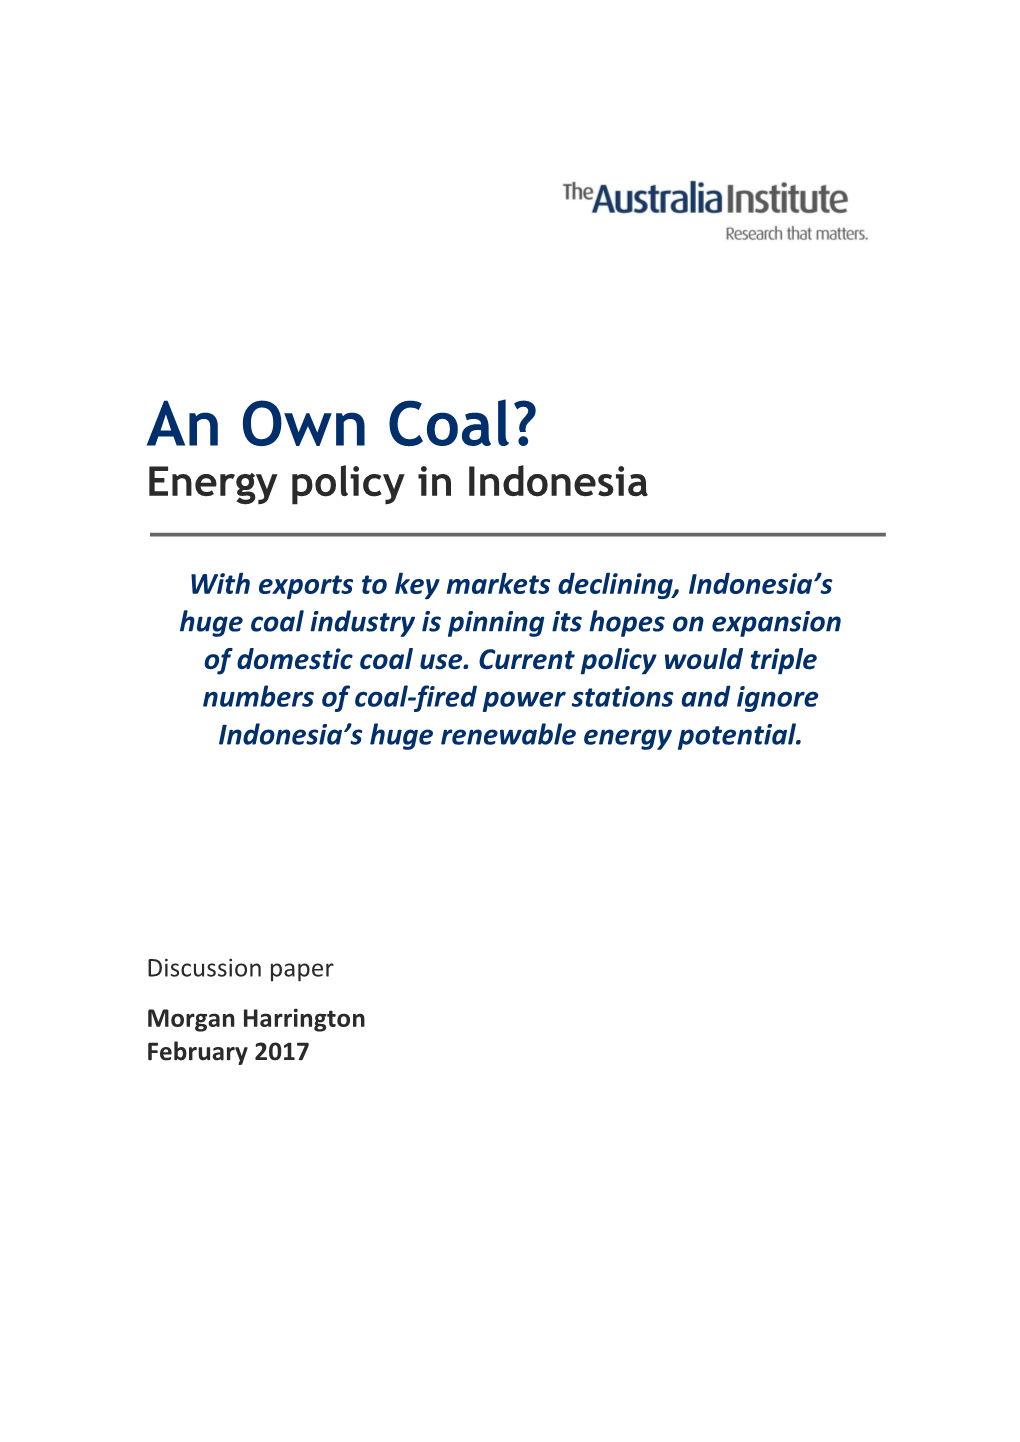 An Own Coal? Energy Policy in Indonesia